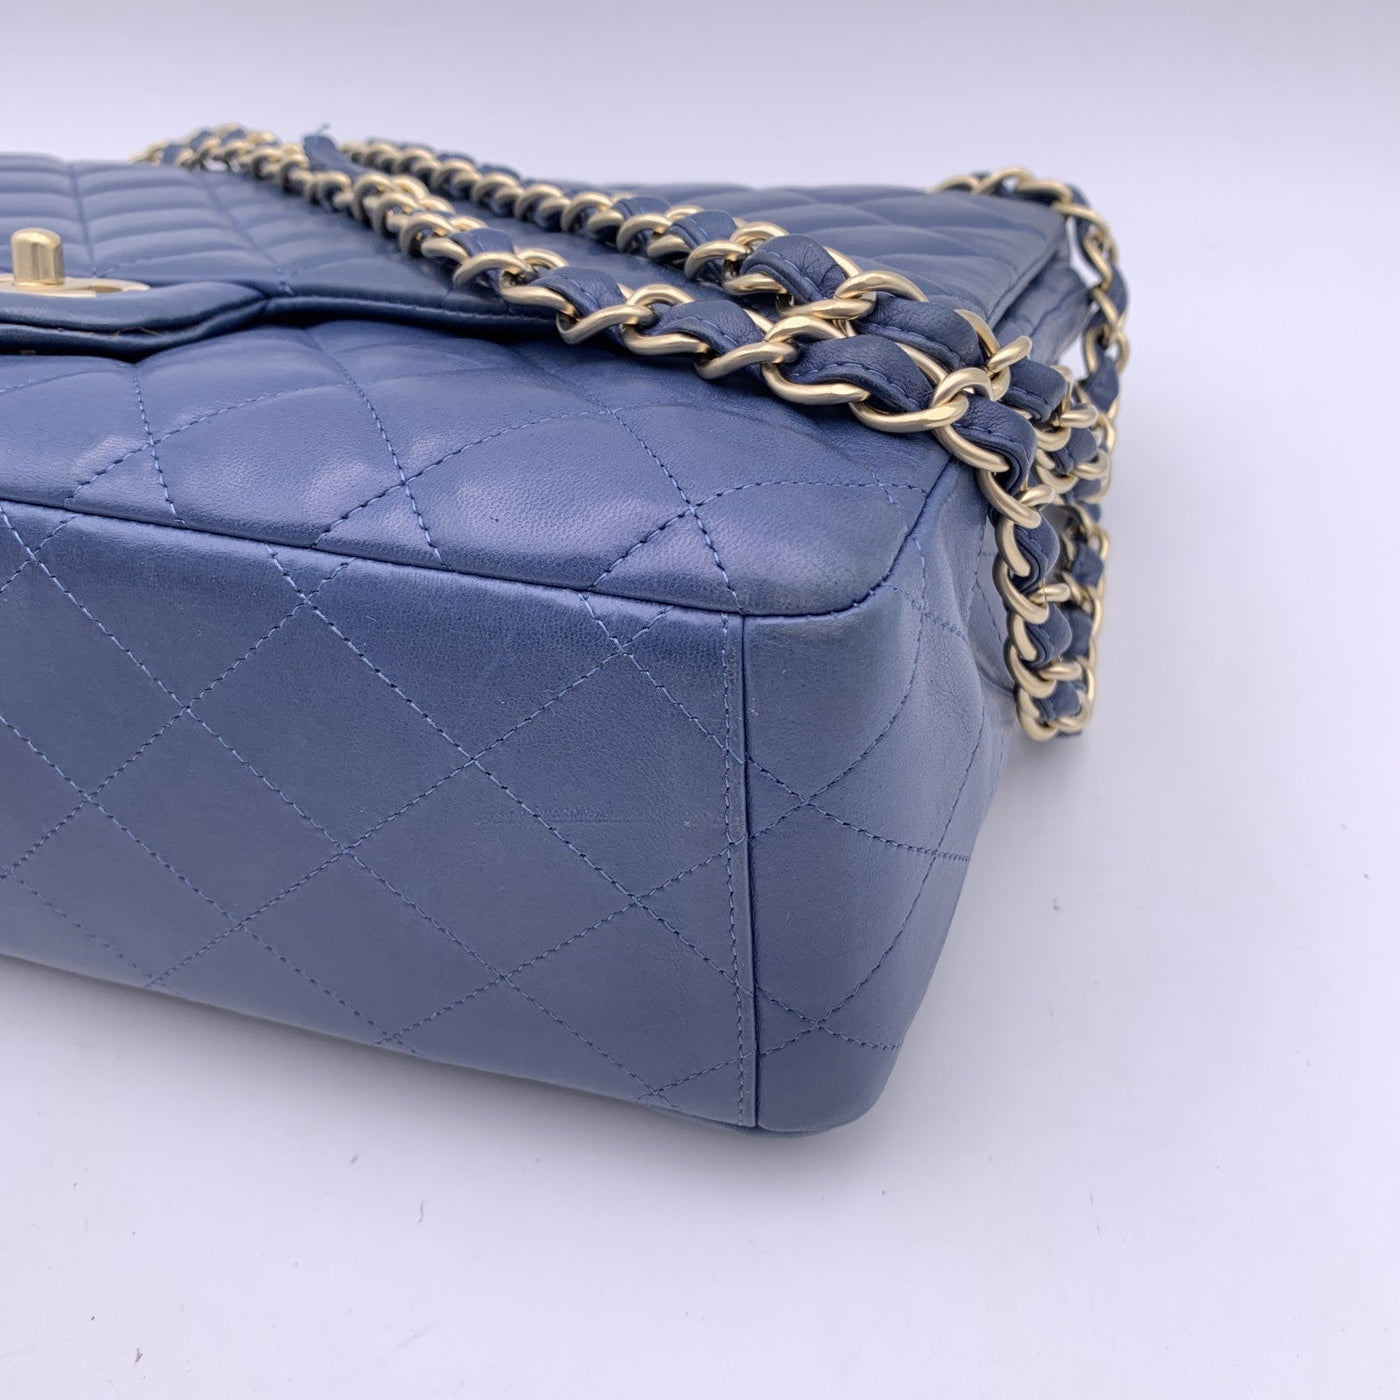 Chanel Blue Quilted Leather Maxi Timeless Classic 2.55 Single Flap